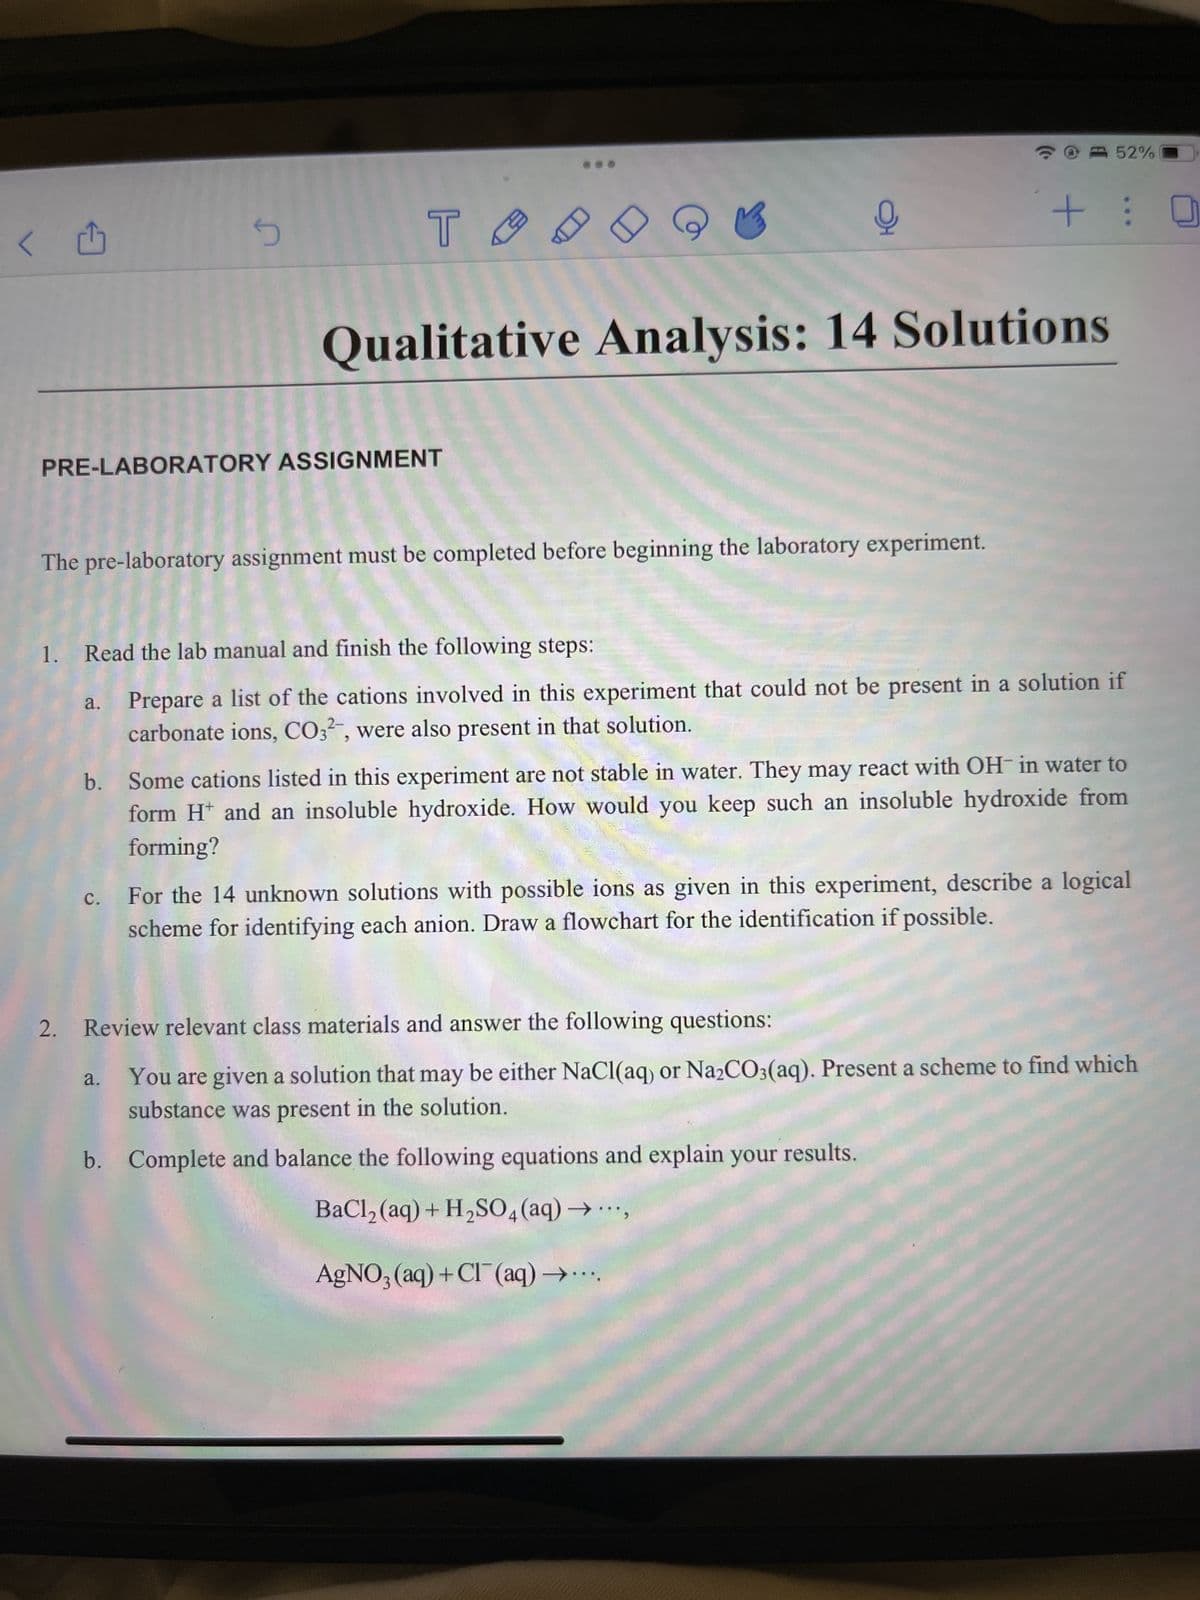 <
d
5
PRE-LABORATORY ASSIGNMENT
TA
Qualitative Analysis: 14 Solutions
a.
The pre-laboratory assignment must be completed before beginning the laboratory experiment.
오
52%
1. Read the lab manual and finish the following steps:
Prepare a list of the cations involved in this experiment that could not be present in a solution if
carbonate ions, CO32-, were also present in that solution.
a.
+: 0
b. Some cations listed in this experiment are not stable in water. They may react with OH- in water to
form H* and an insoluble hydroxide. How would you keep such an insoluble hydroxide from
forming?
c. For the 14 unknown solutions with possible ions as given in this experiment, describe a logical
scheme for identifying each anion. Draw a flowchart for the identification if possible.
2. Review relevant class materials and answer the following questions:
You are given a solution that may be either NaCl(aq) or Na₂CO3(aq). Present a scheme to find which
substance was present in the solution.
b. Complete and balance the following equations and explain your results.
BaCl₂ (aq) + H₂SO4 (aq) -
AgNO3(aq) + Cl(aq) -